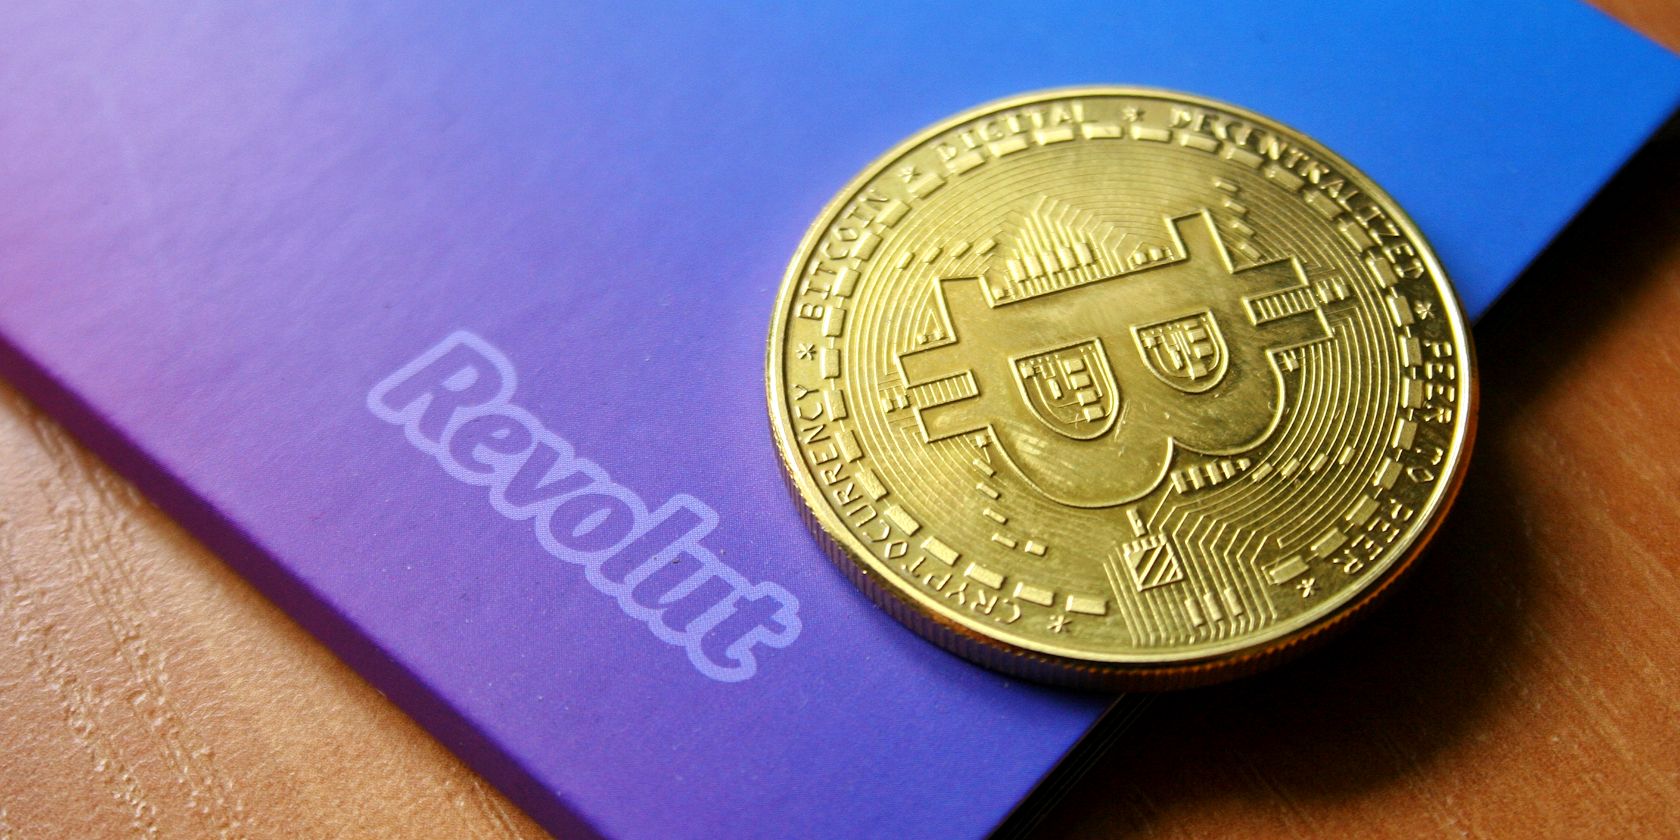 revolut credit card with gold physical bitcoin on top feature